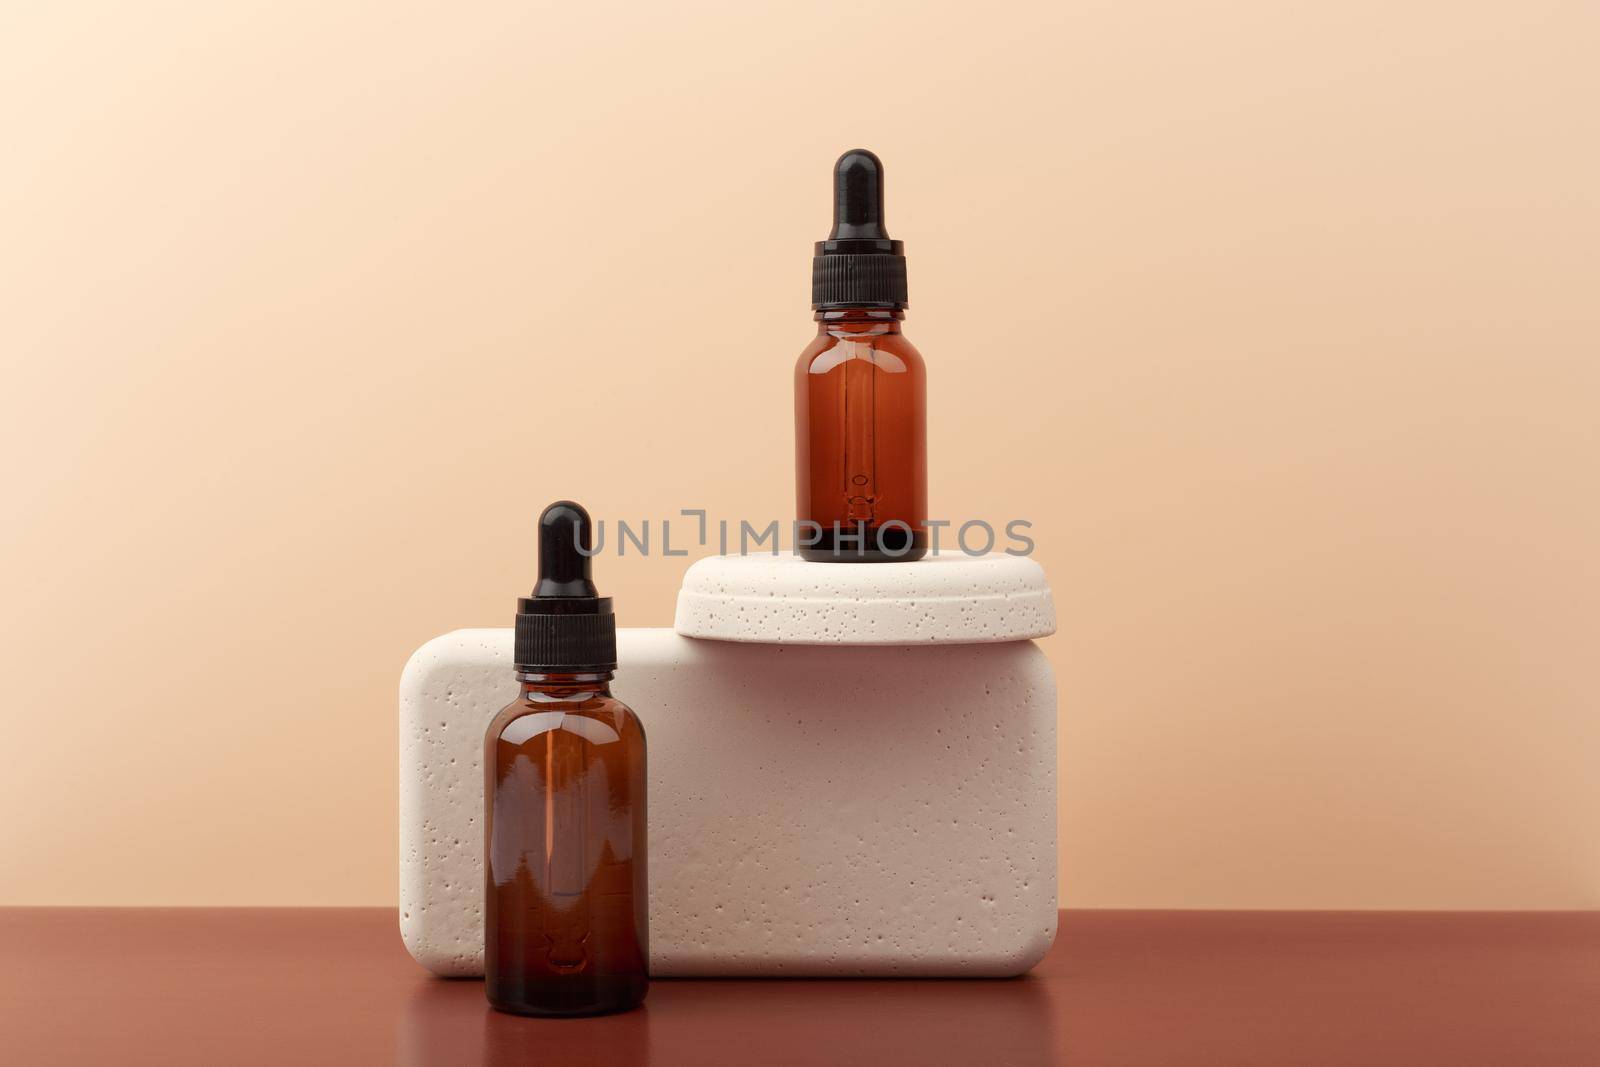 Two dark bottles with skin serum or oil for nails with beige geometric props on brown table against beige background with copy space. Concept of skin care or manicure